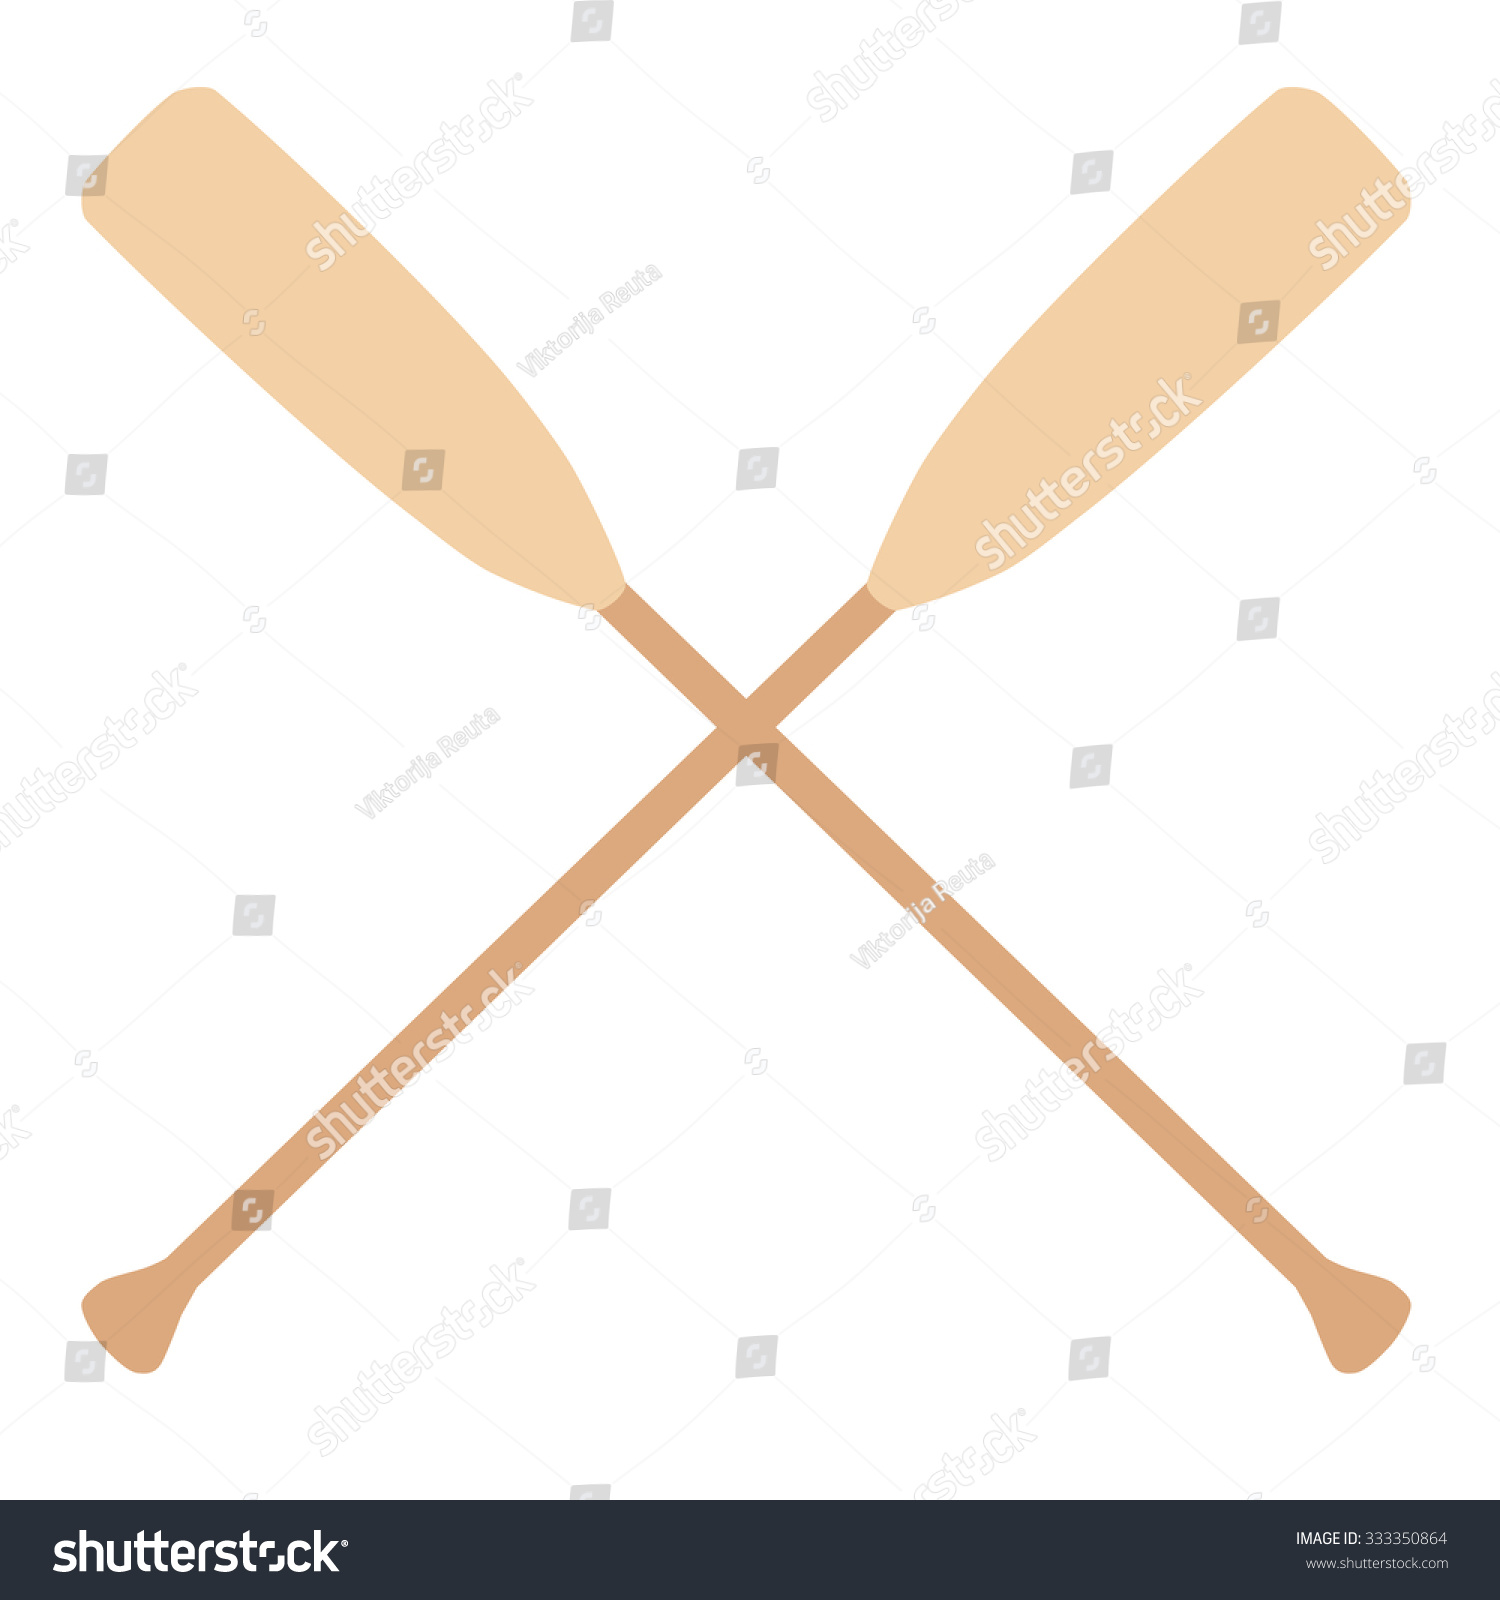 Two Wooden Crossed Oars Raster Isolated Stock Illustration 333350864 ...